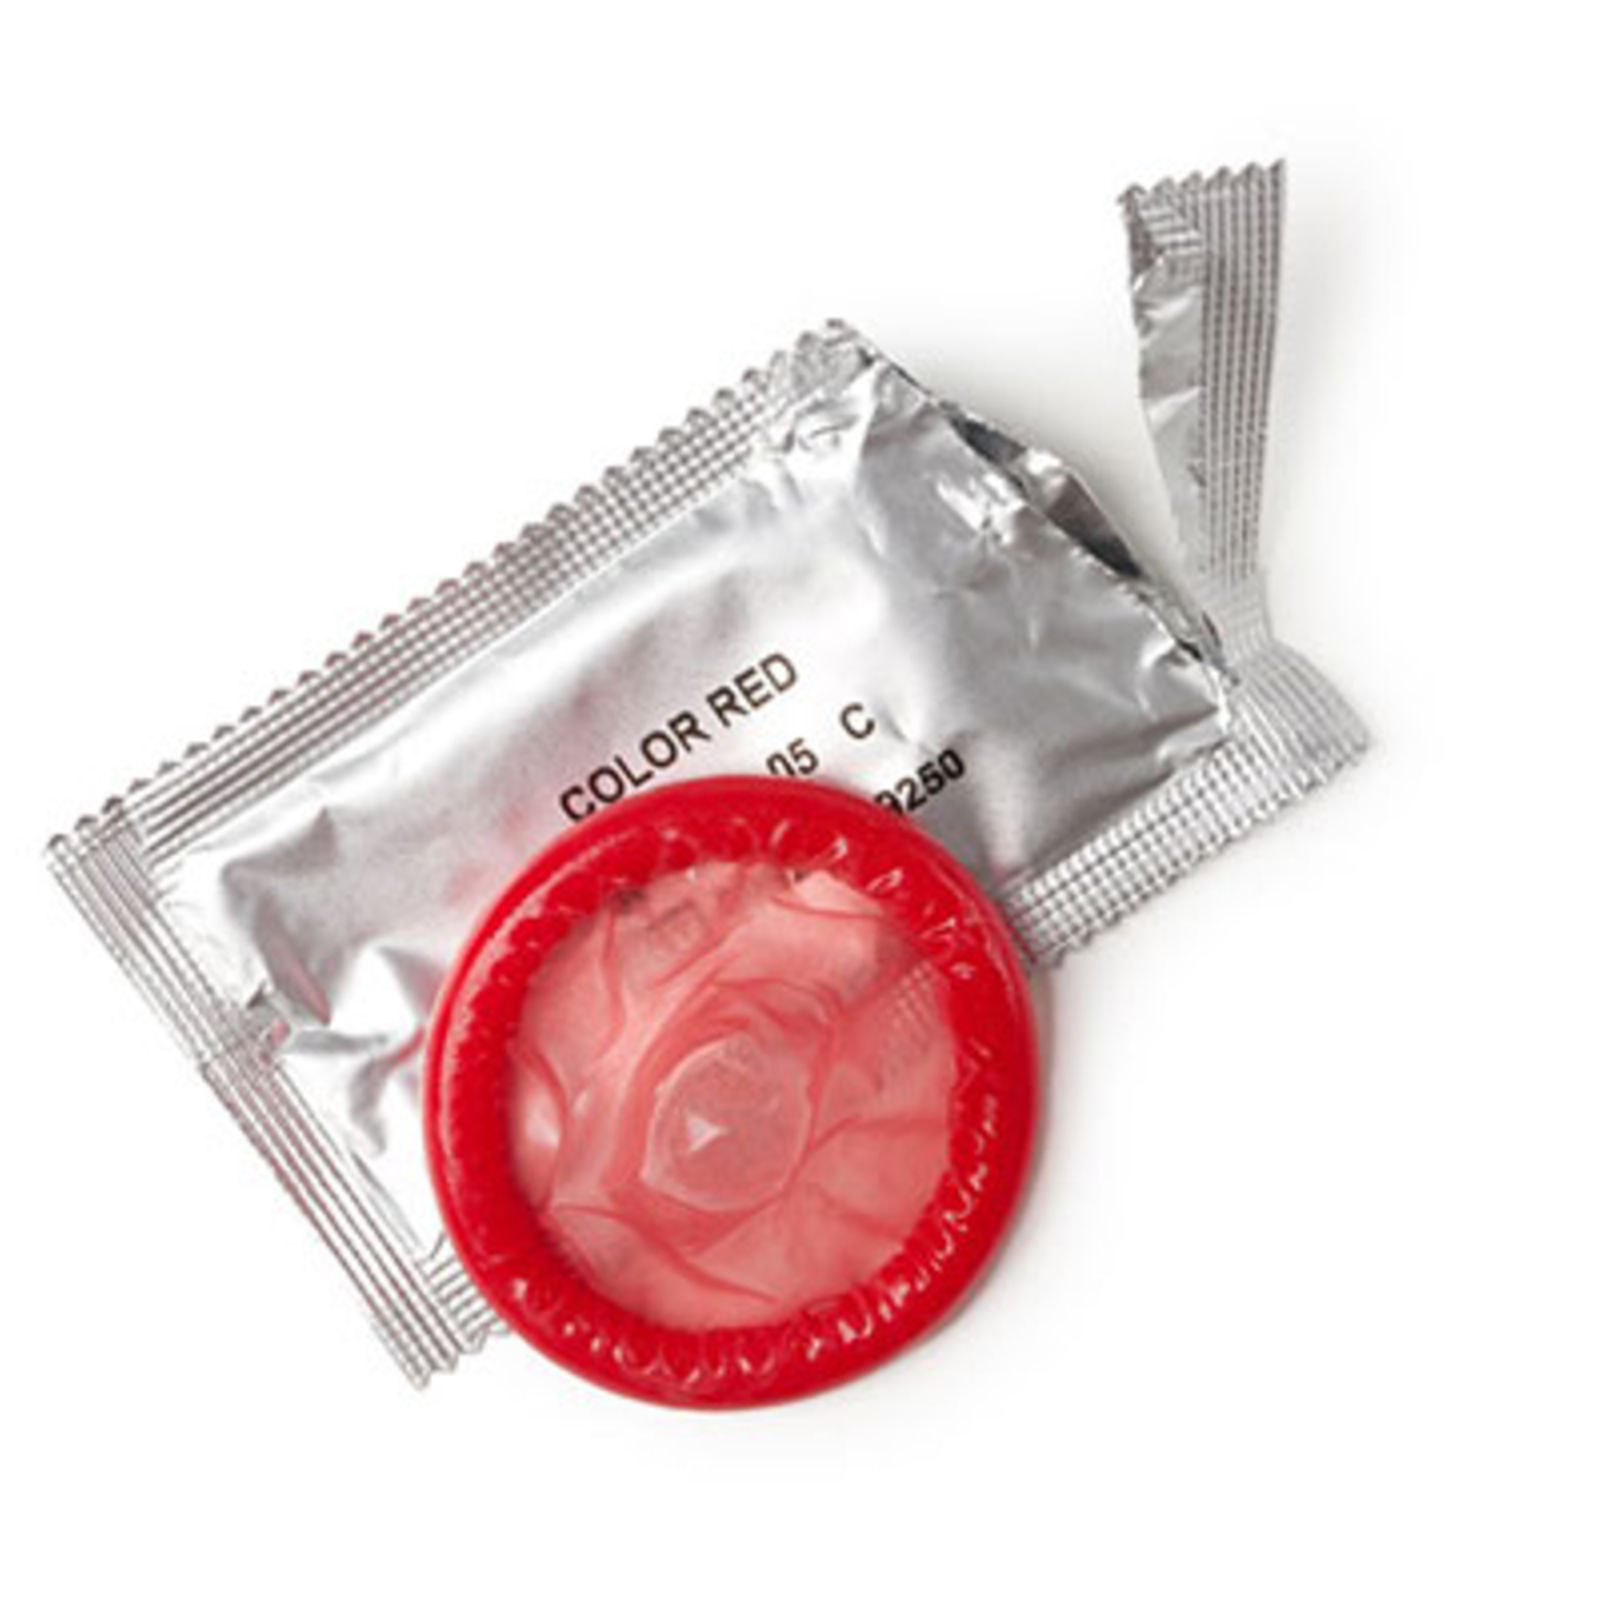 My wife wants us to use condoms Nation pic